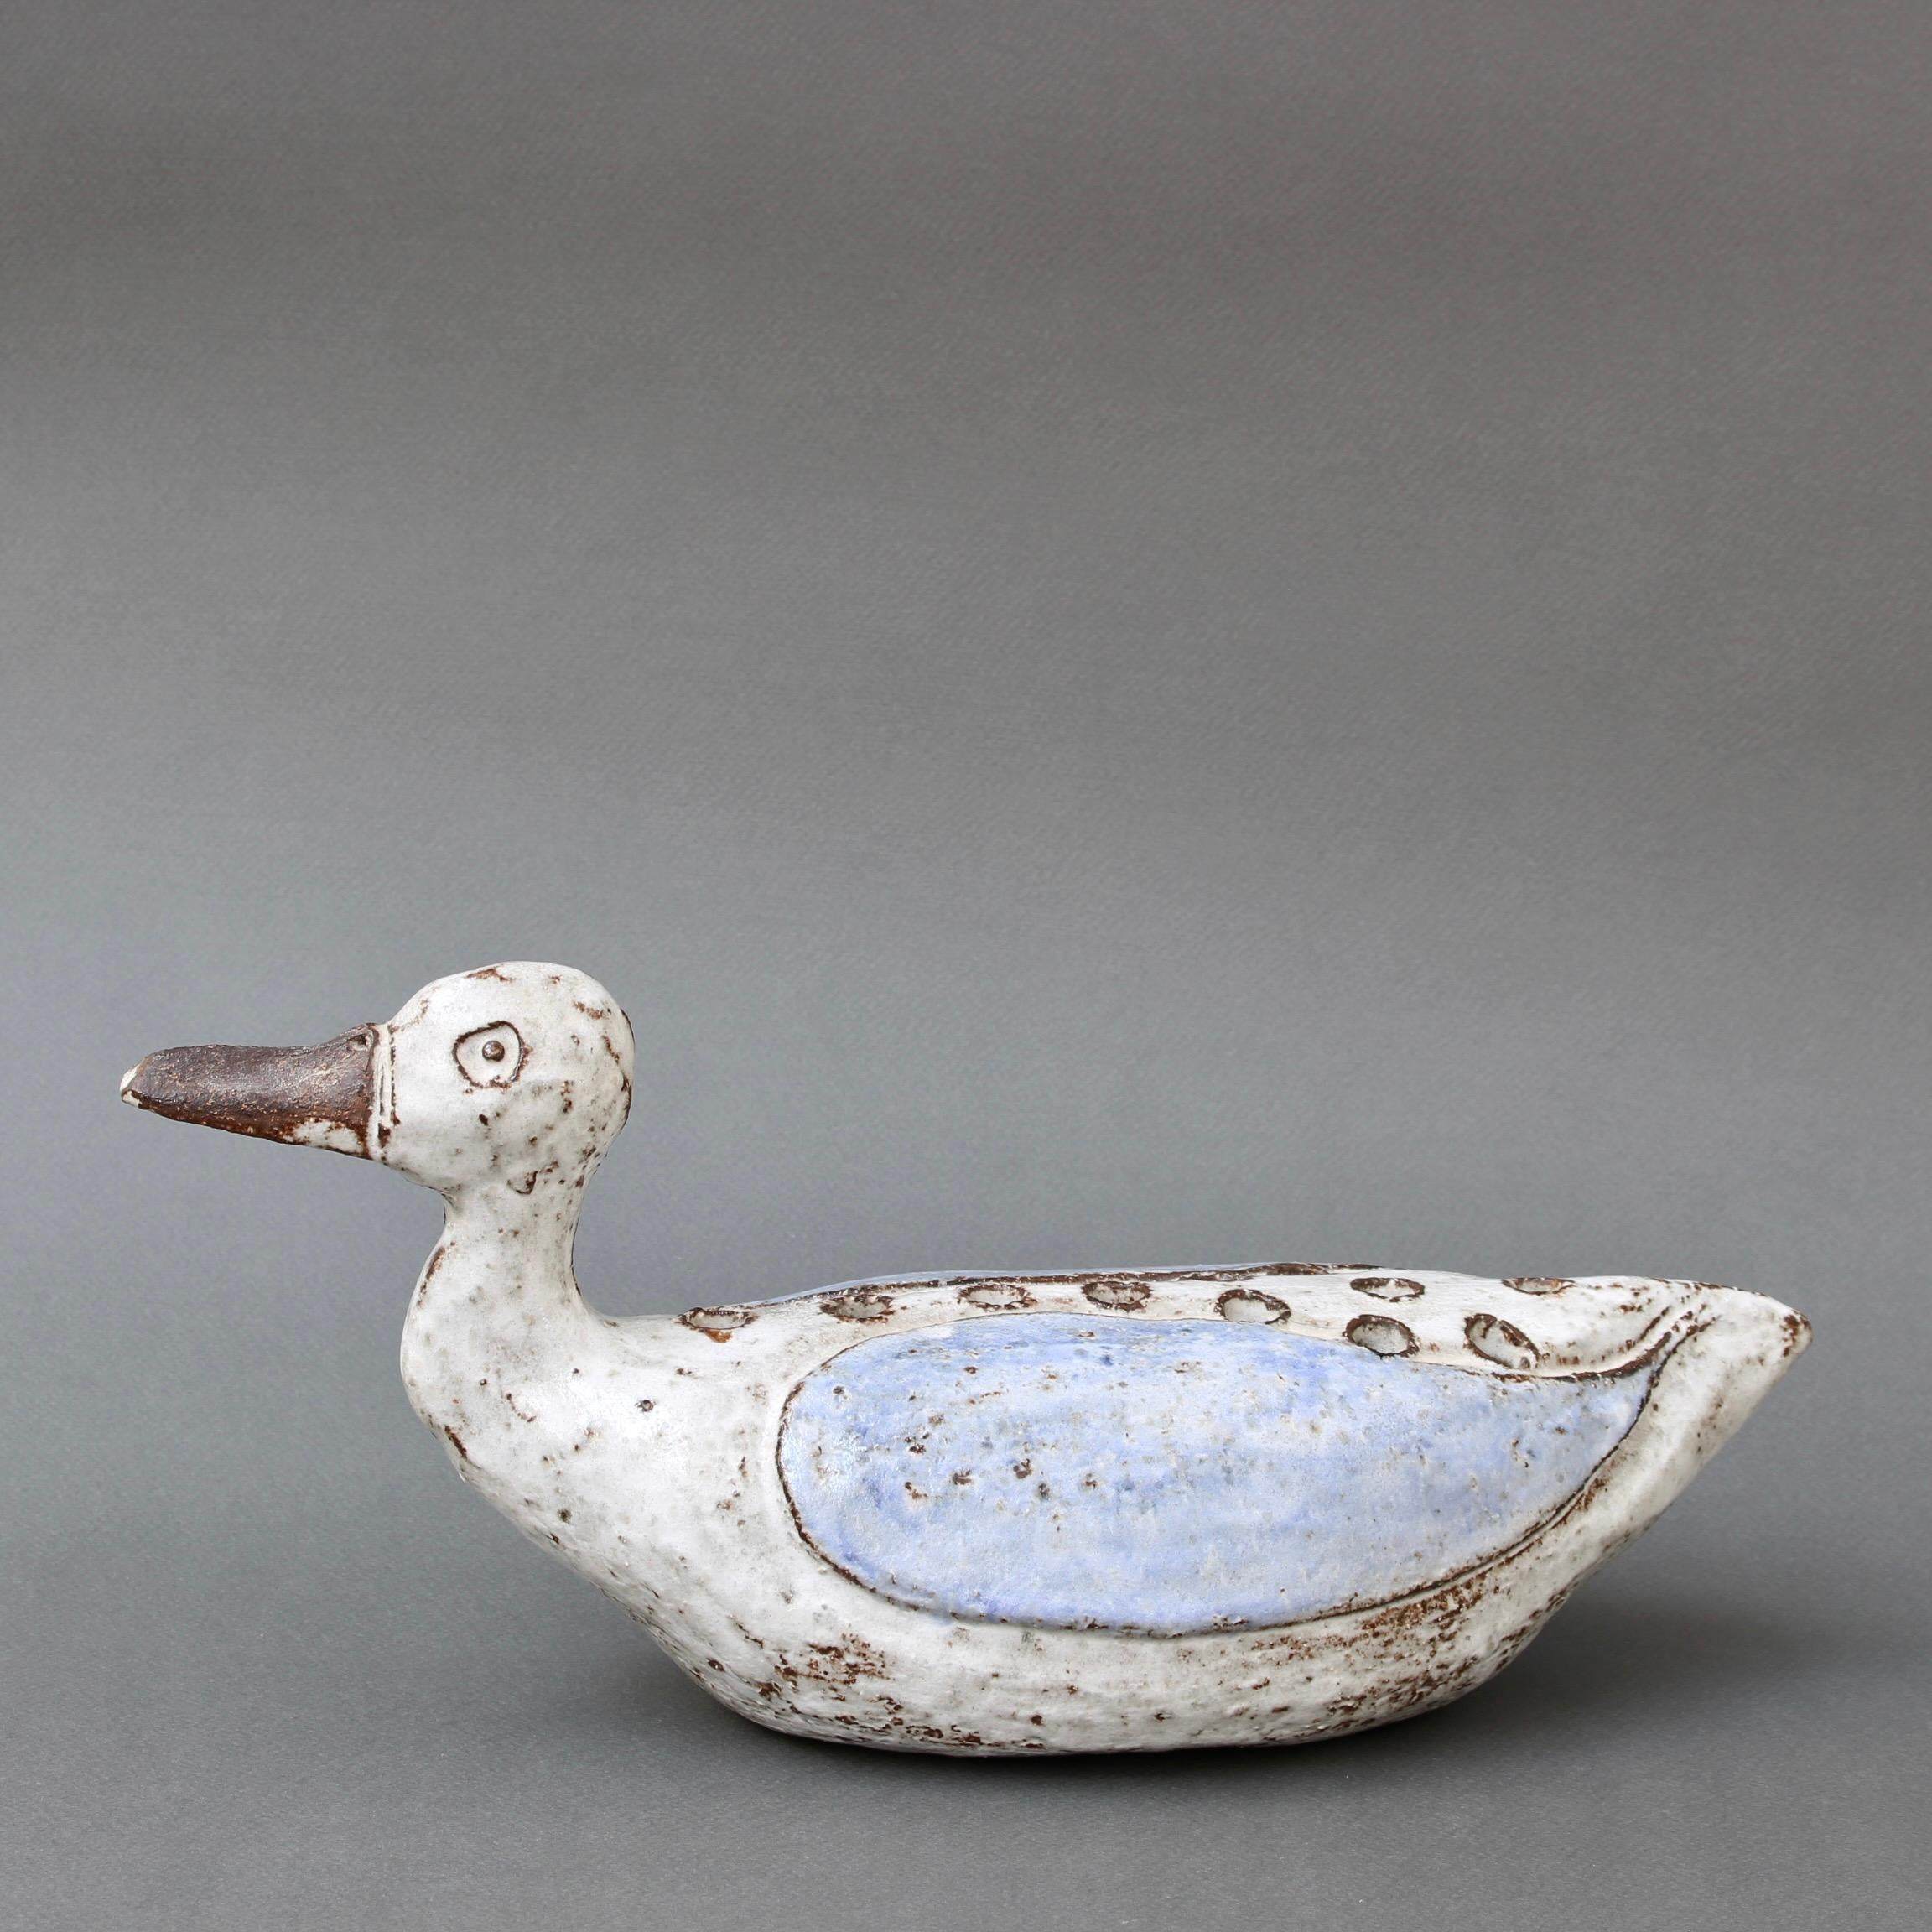 Mid-century French ceramic duck flower vase (circa 1960s) by Albert Thiry. A chalk-white glaze is complemented by a delicate, pale blue on the wings of this ceramic duck-shaped vase. The markings and colouring are quintessential Albert Thiry with